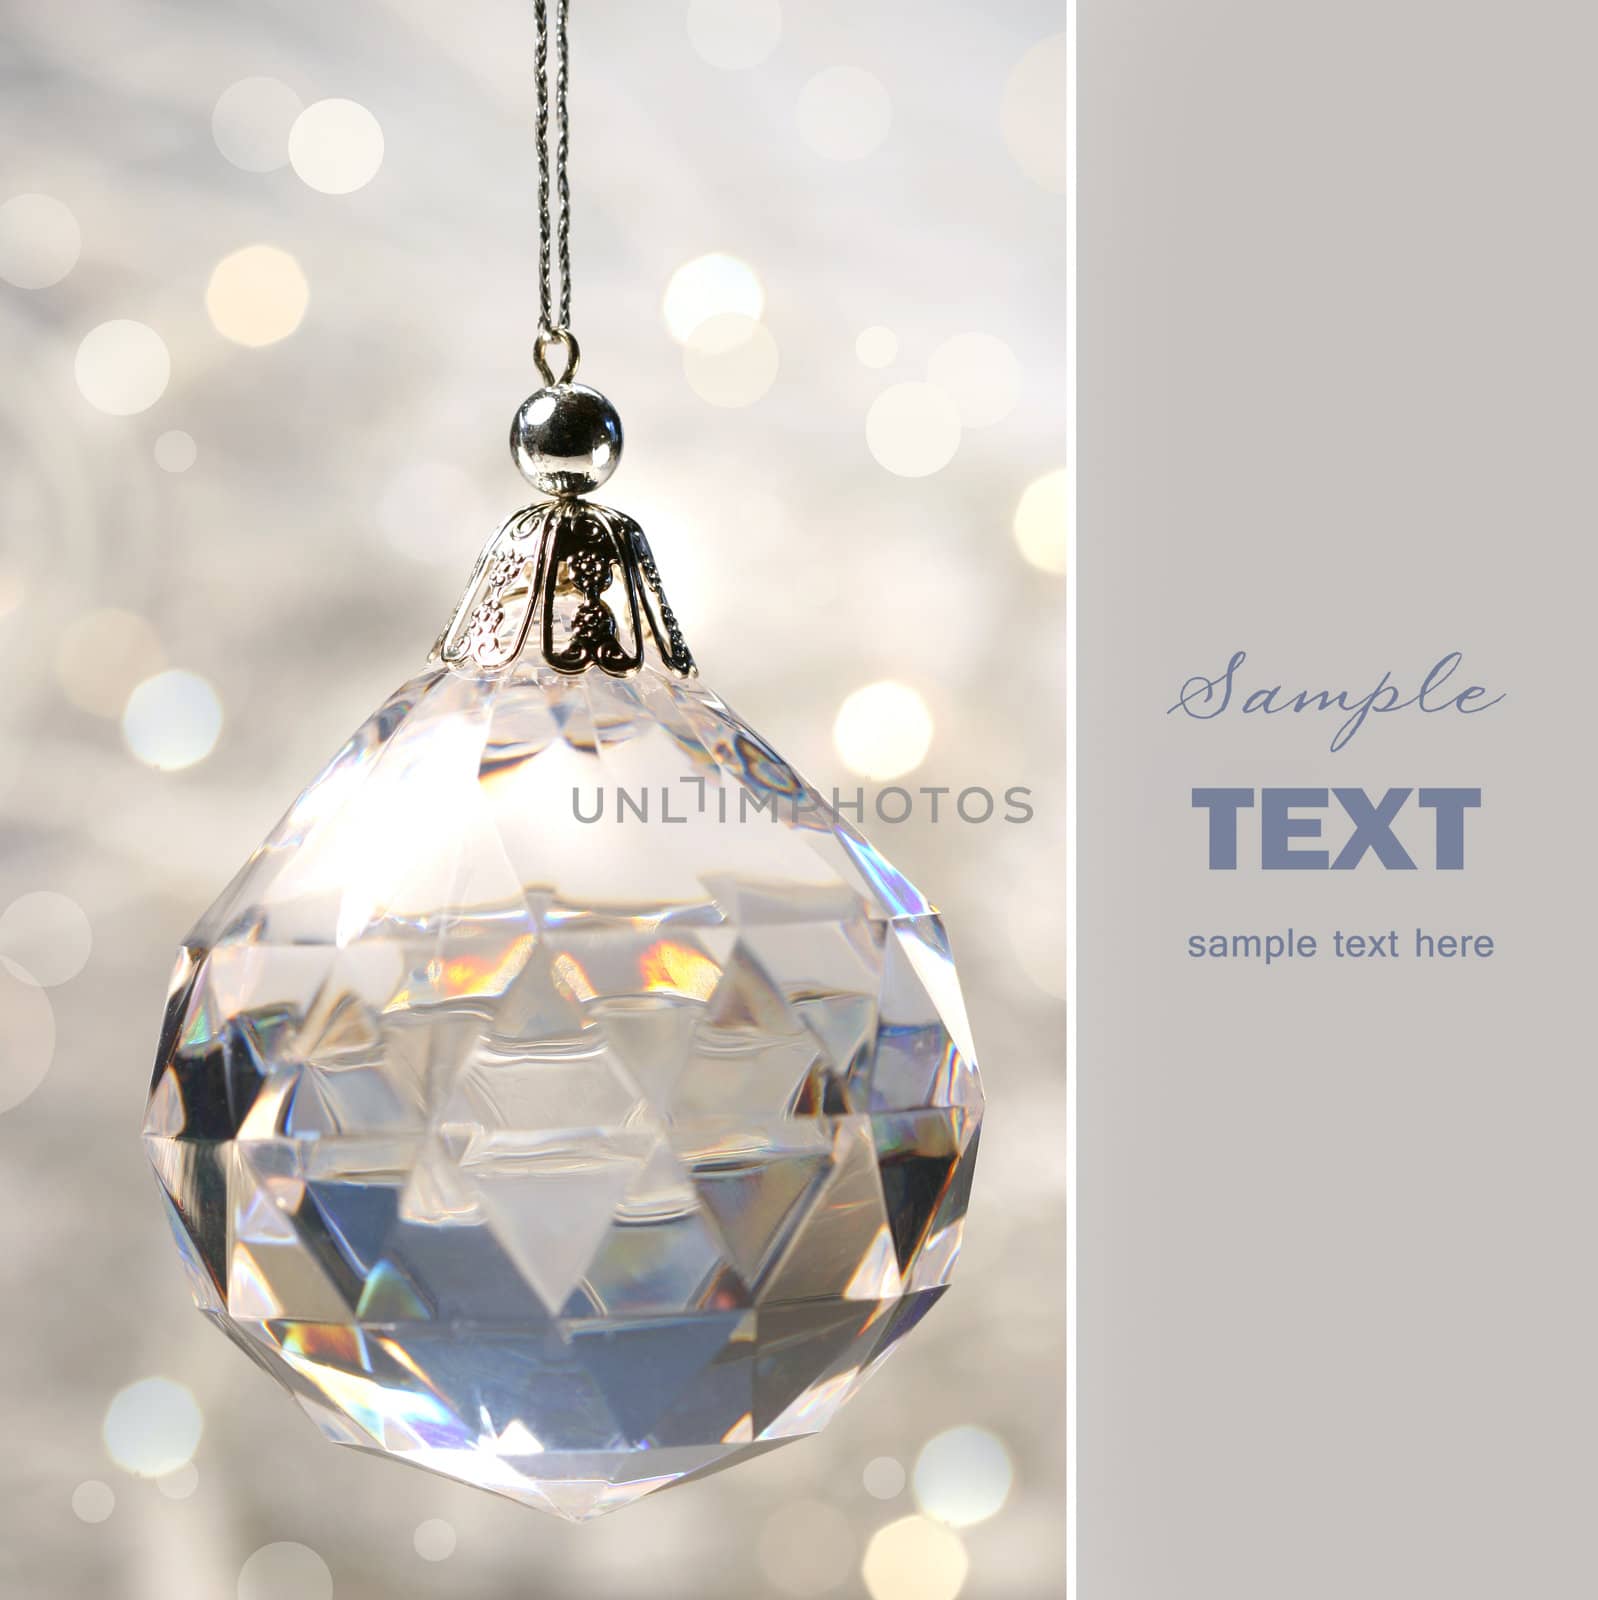 Crystal ornament hanging with lights by Sandralise